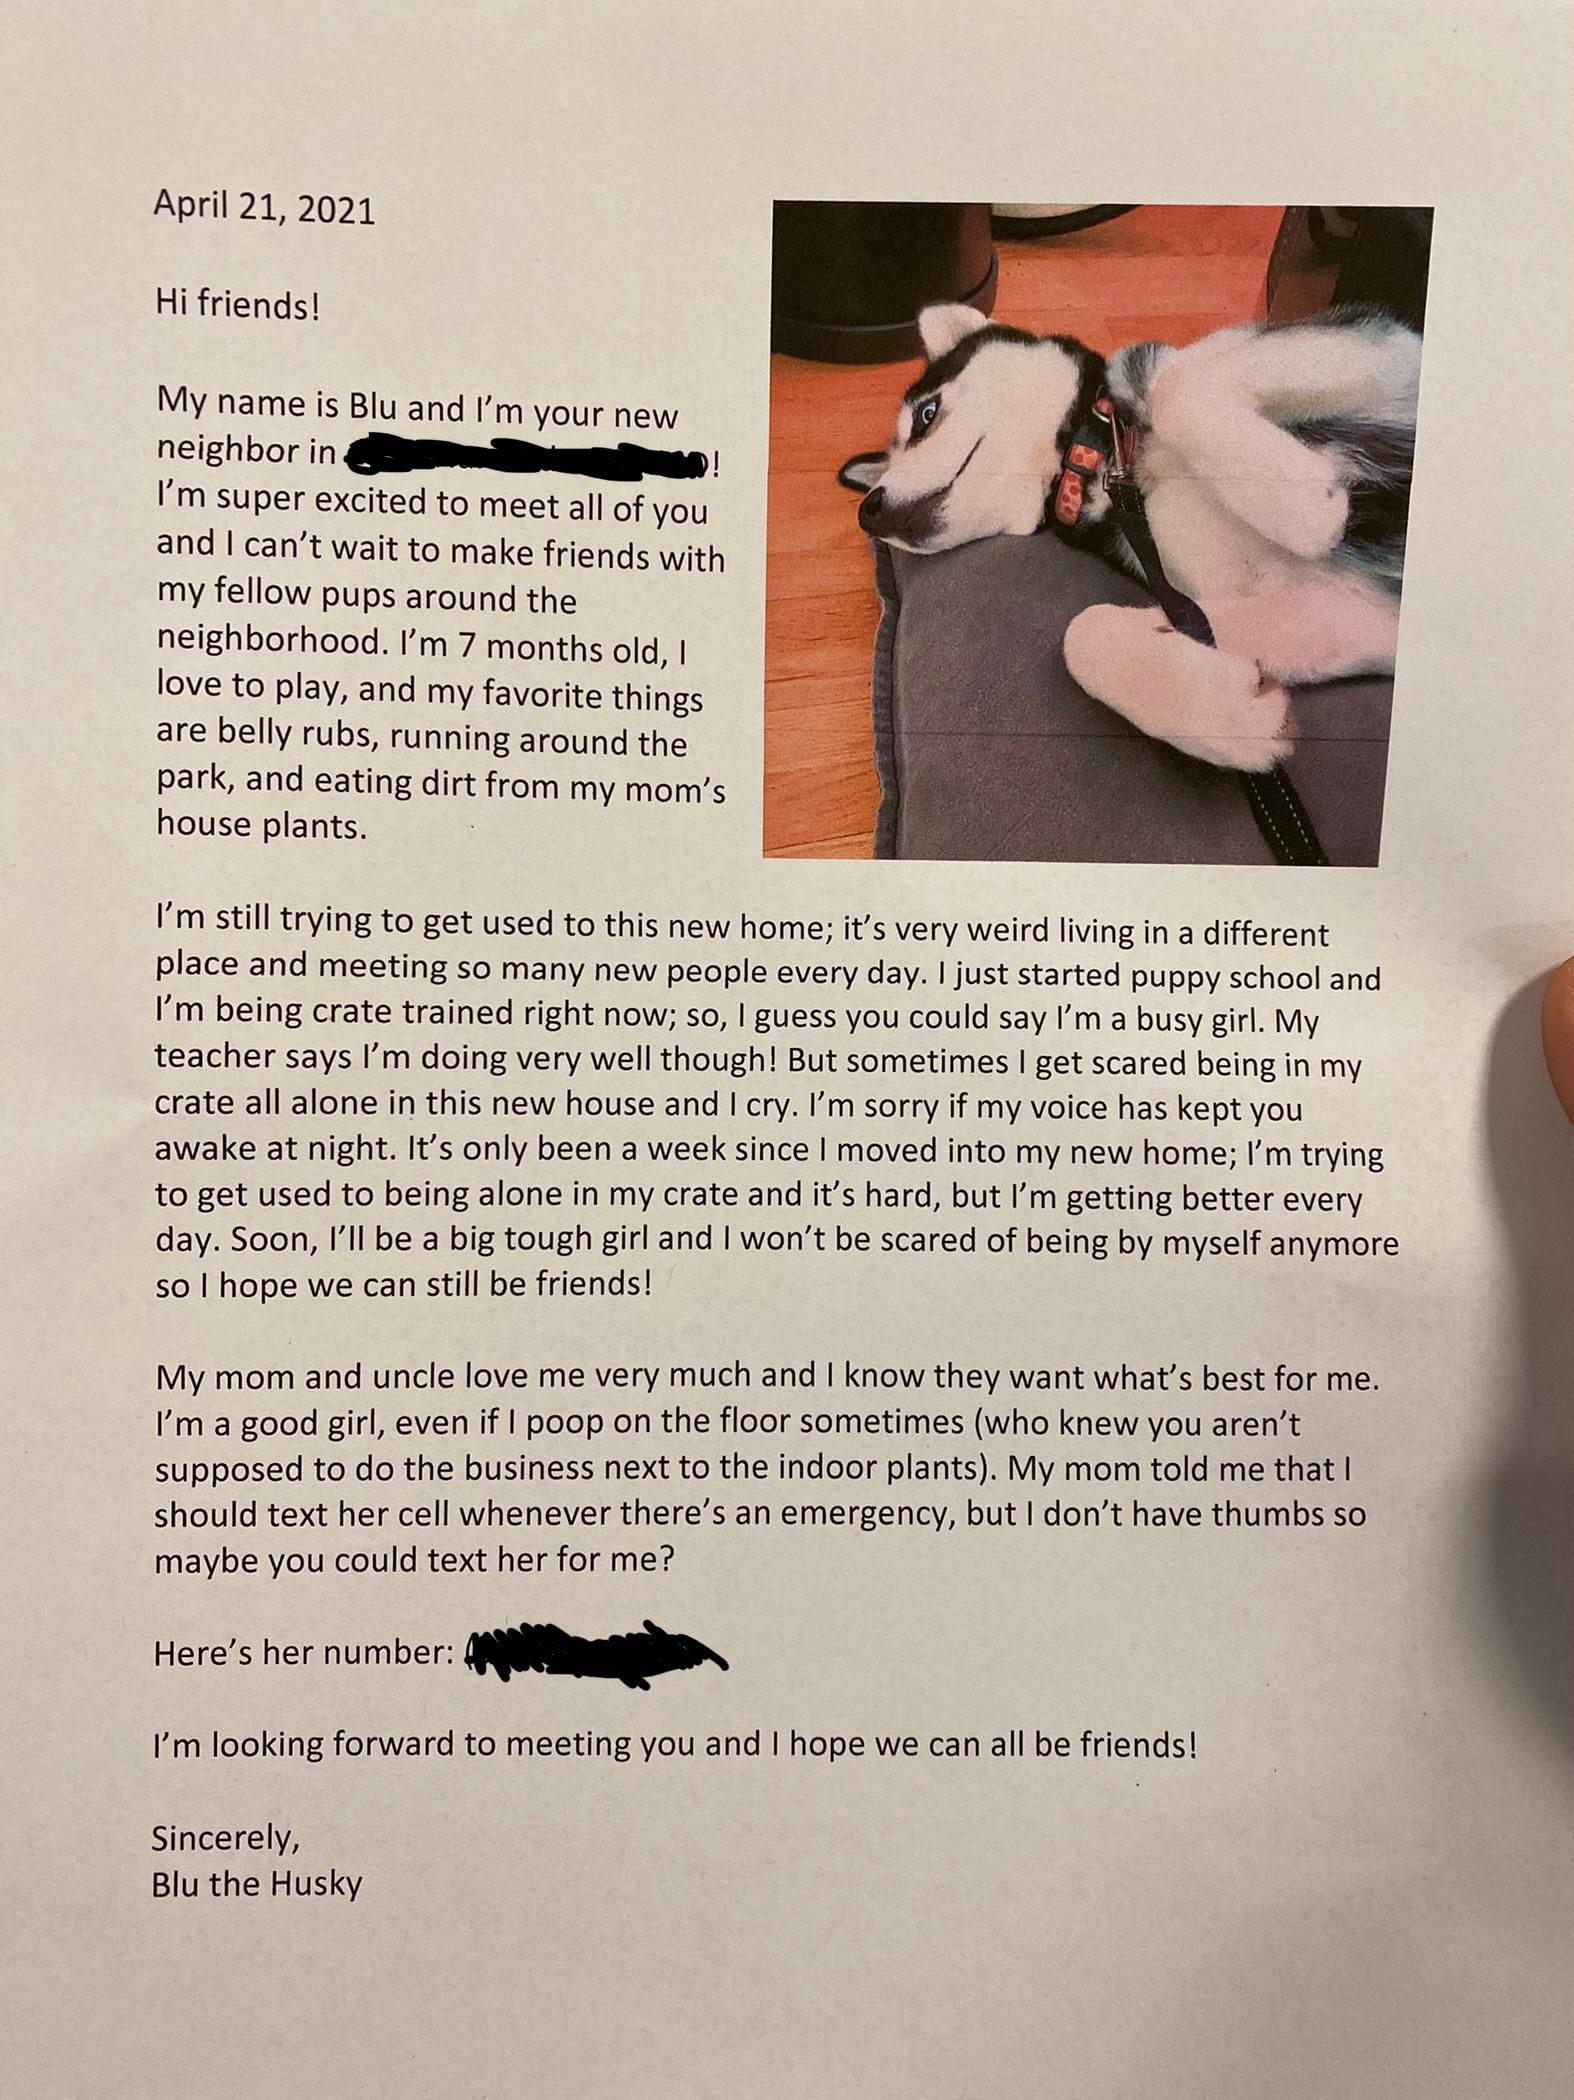 Just received this letter at my doorstep. Definitely made me chuckle and glad to see people like this are still around.